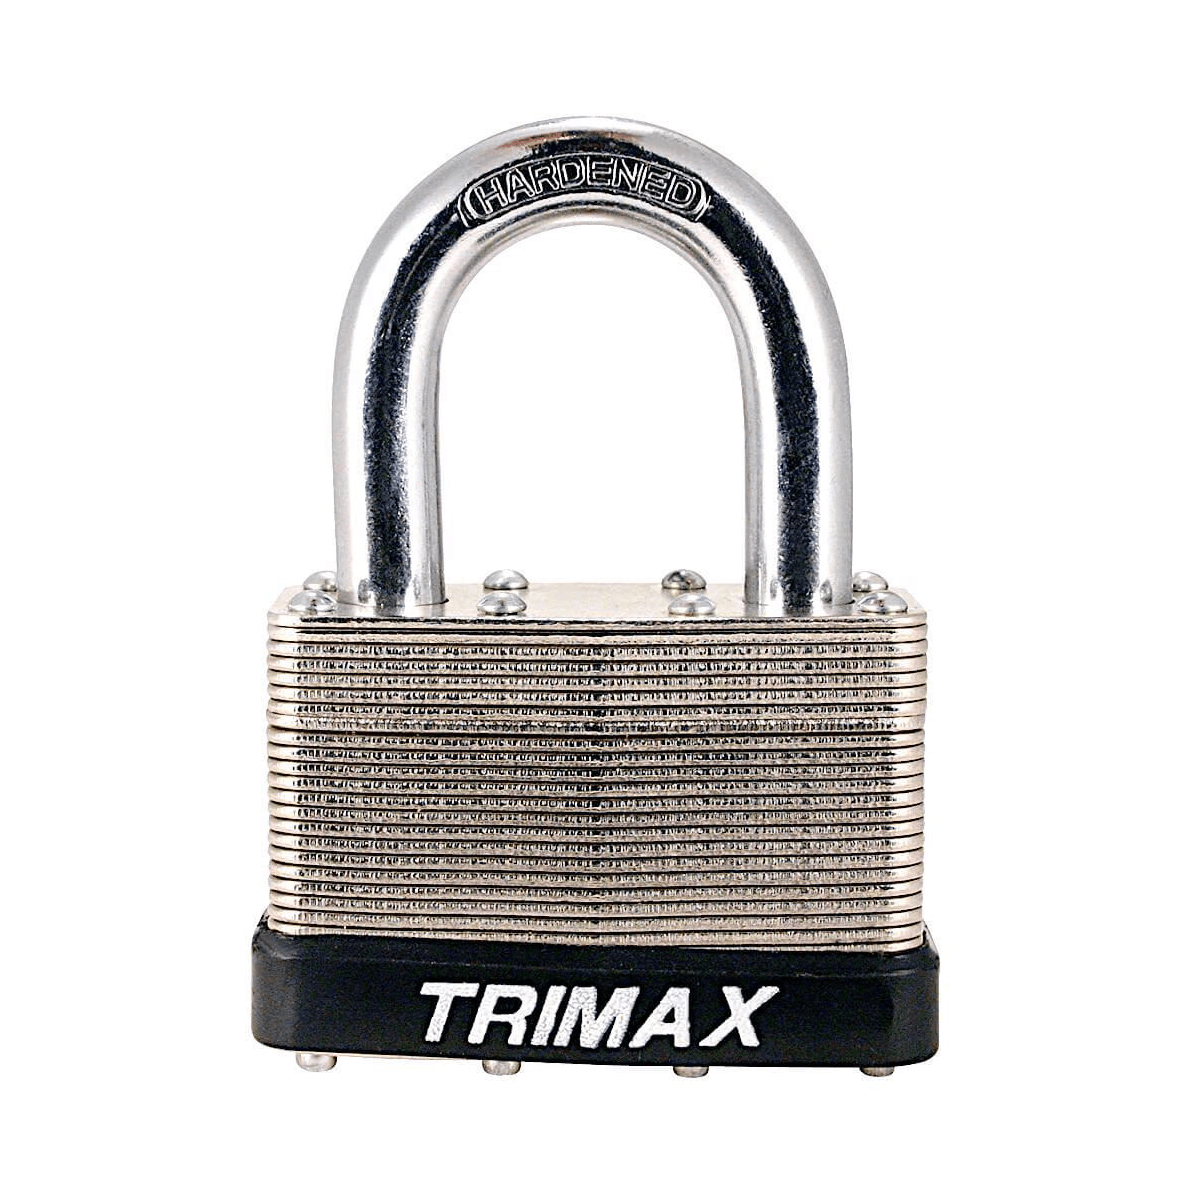 Trimax TLM87 Dual Locking 30mm Solid Steel Laminated Padlock with 7/8 in. X 3/16 in Diameter Shackle